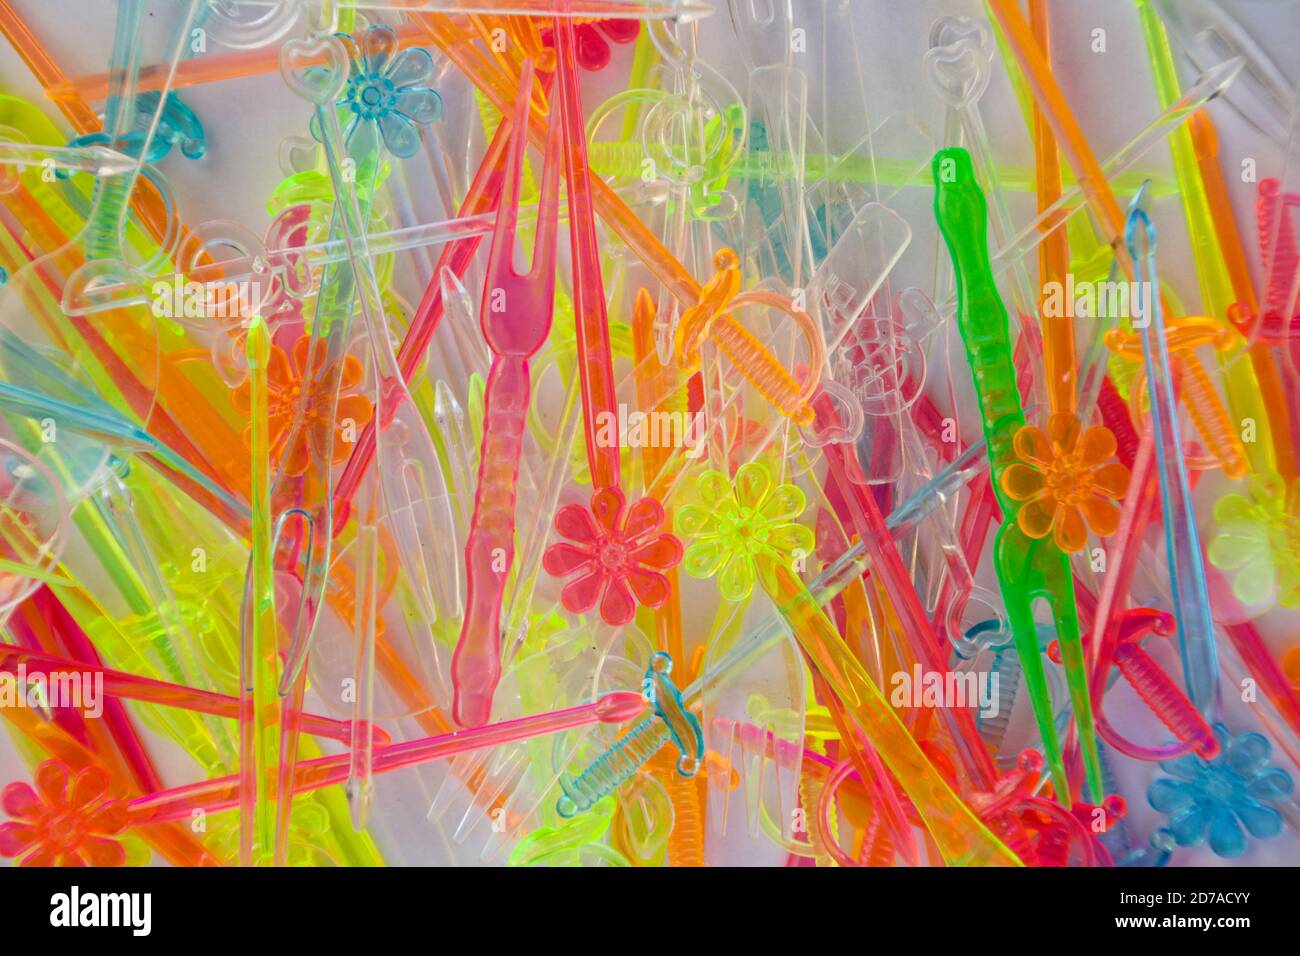 Set of small colored plastic cutlery for decorating appetizers at parties. Stock Photo